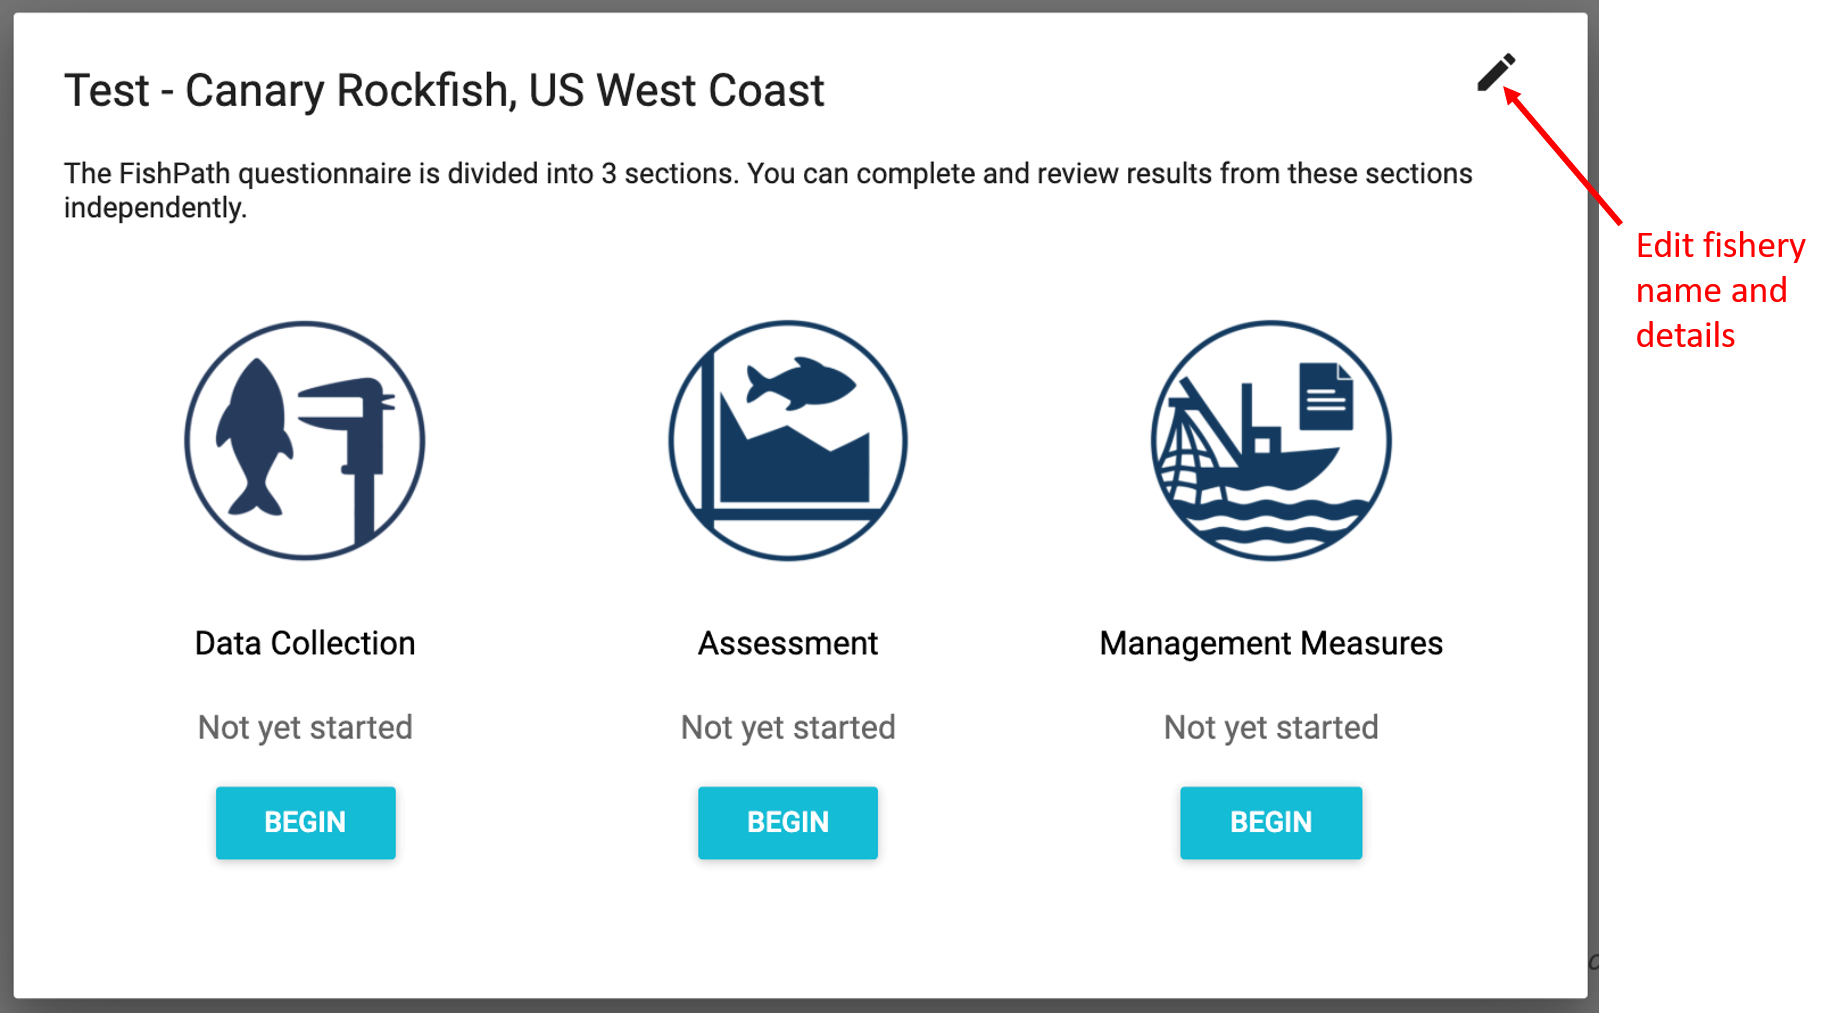 Entry screen to the FishPath Tool questionnaire after fishery information has been defined. The pencil icon (red arrow) allows users to edit fishery name and details.